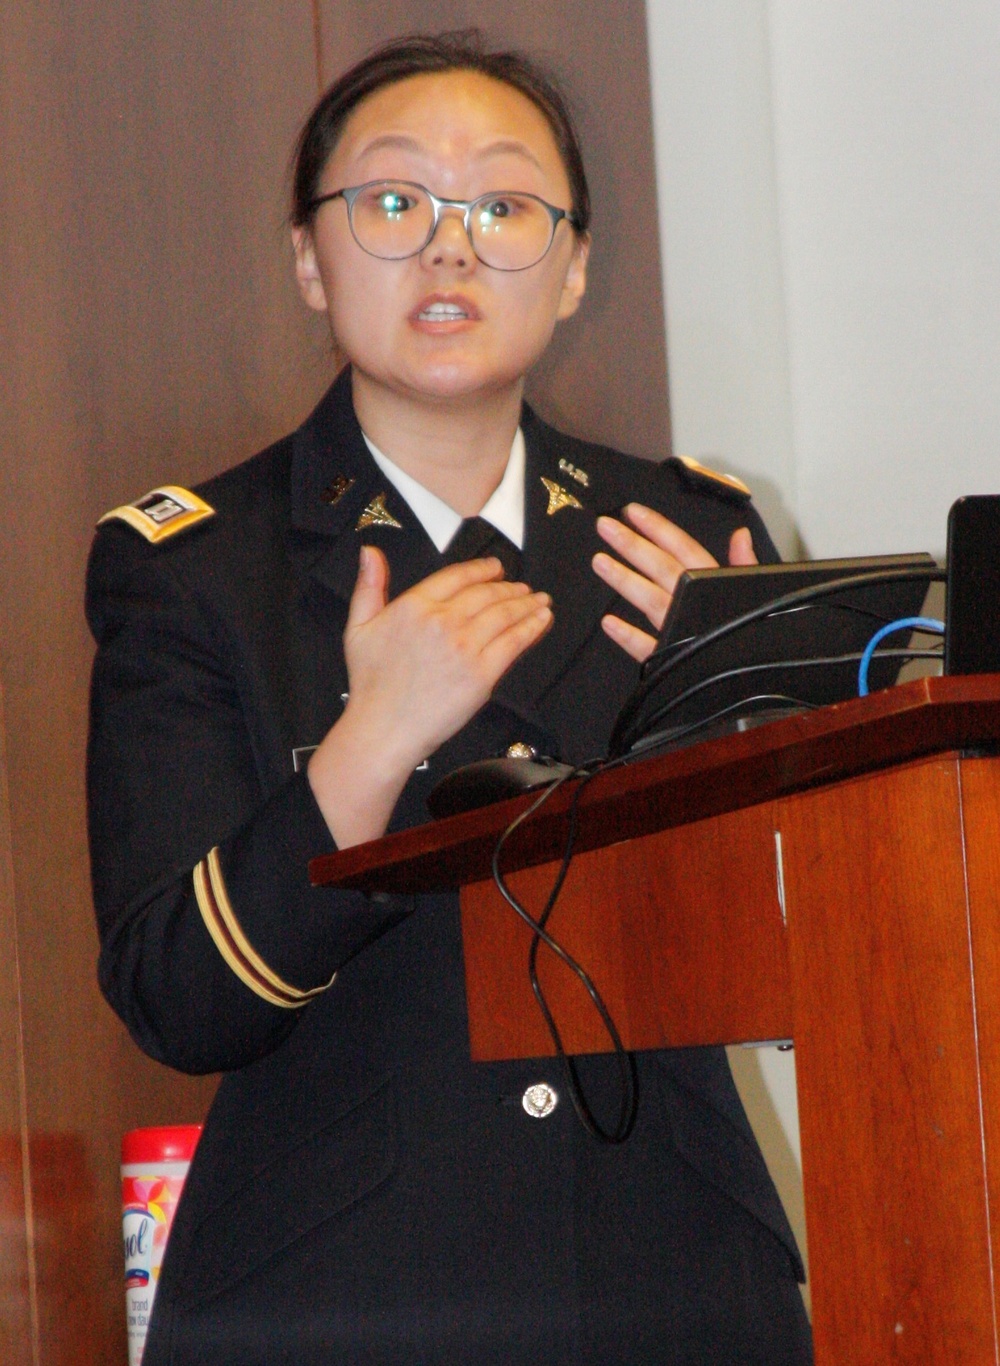 Research, Innovation Month spotlights studies conducted at Walter Reed